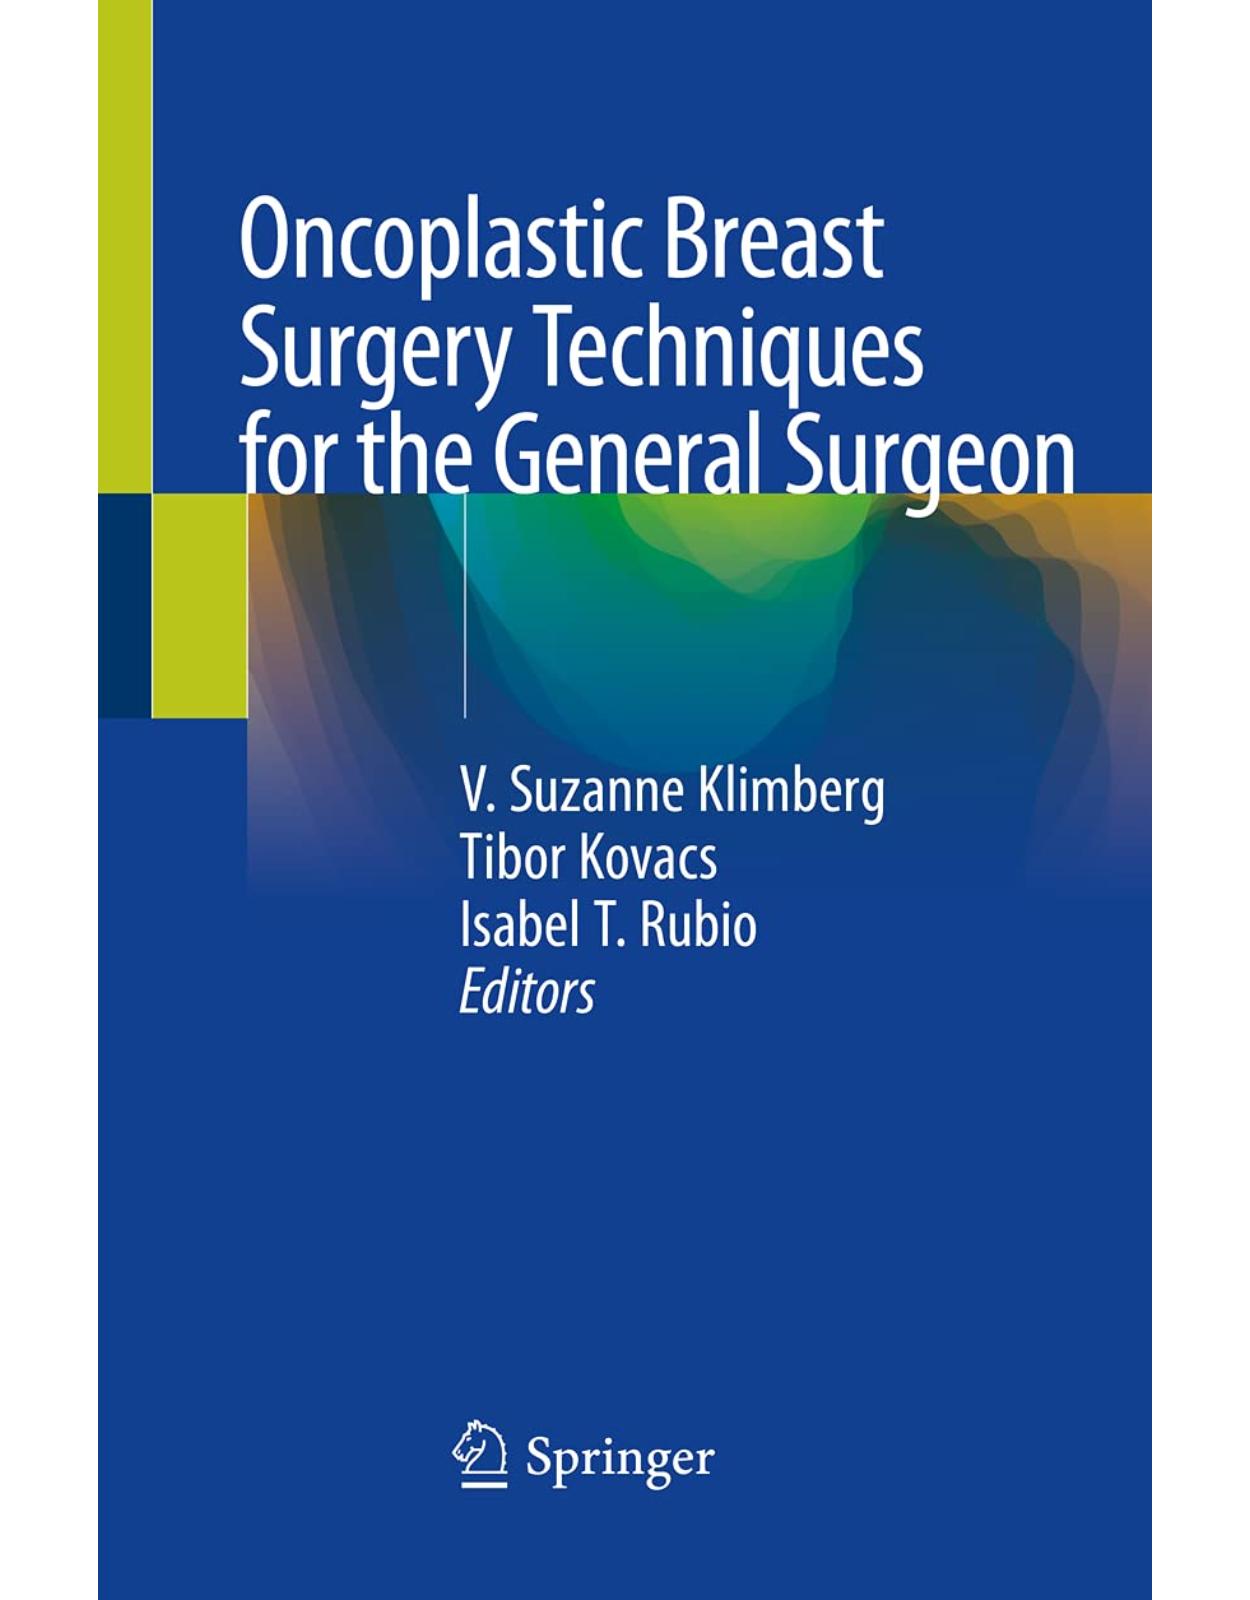 Oncoplastic Breast Surgery Techniques for the General Surgeon